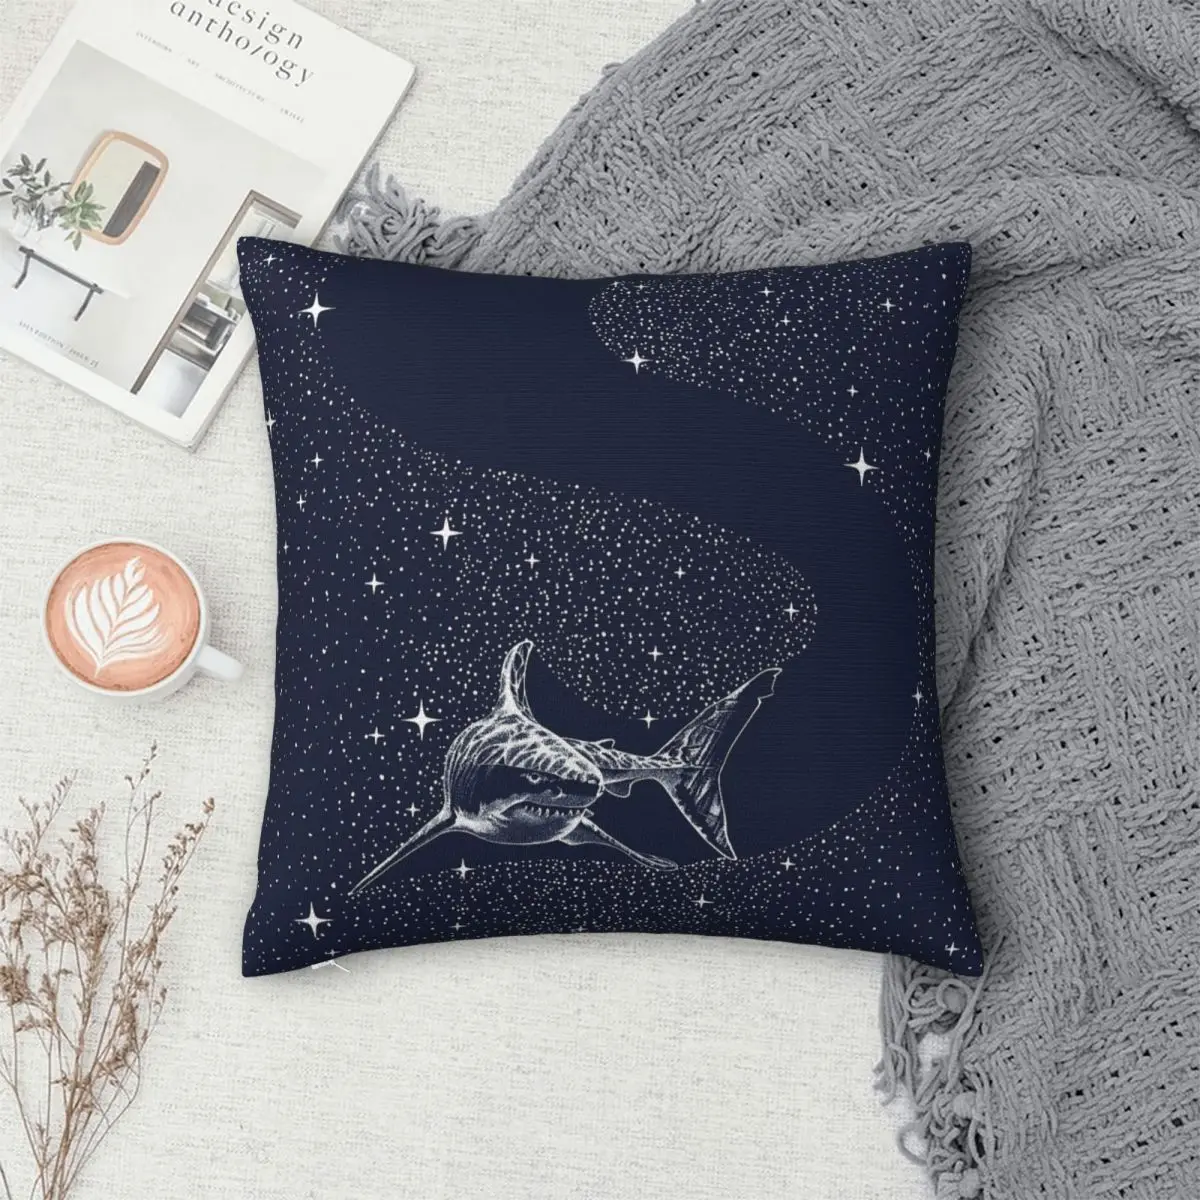 

Starry Shark Pillowcase Polyester Pillows Cover Cushion Comfort Throw Pillow Sofa Decorative Cushions Used for Home Bedroom Sofa